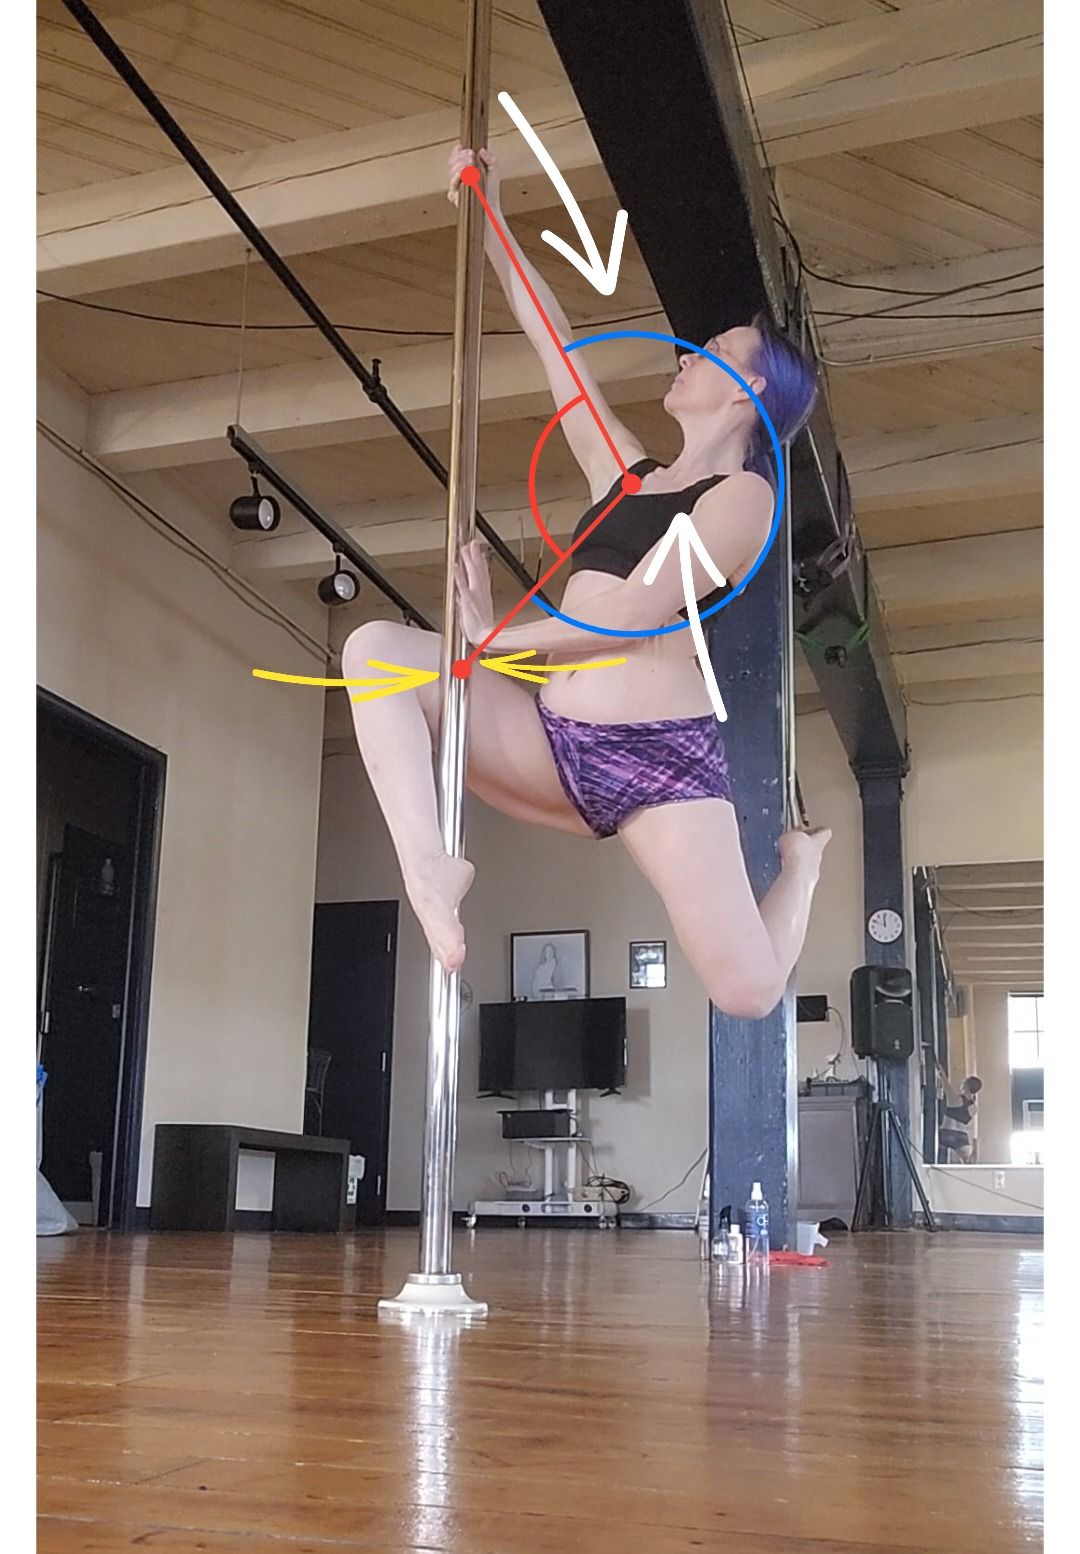 Art in Motion: Embracing the Physics of Pole